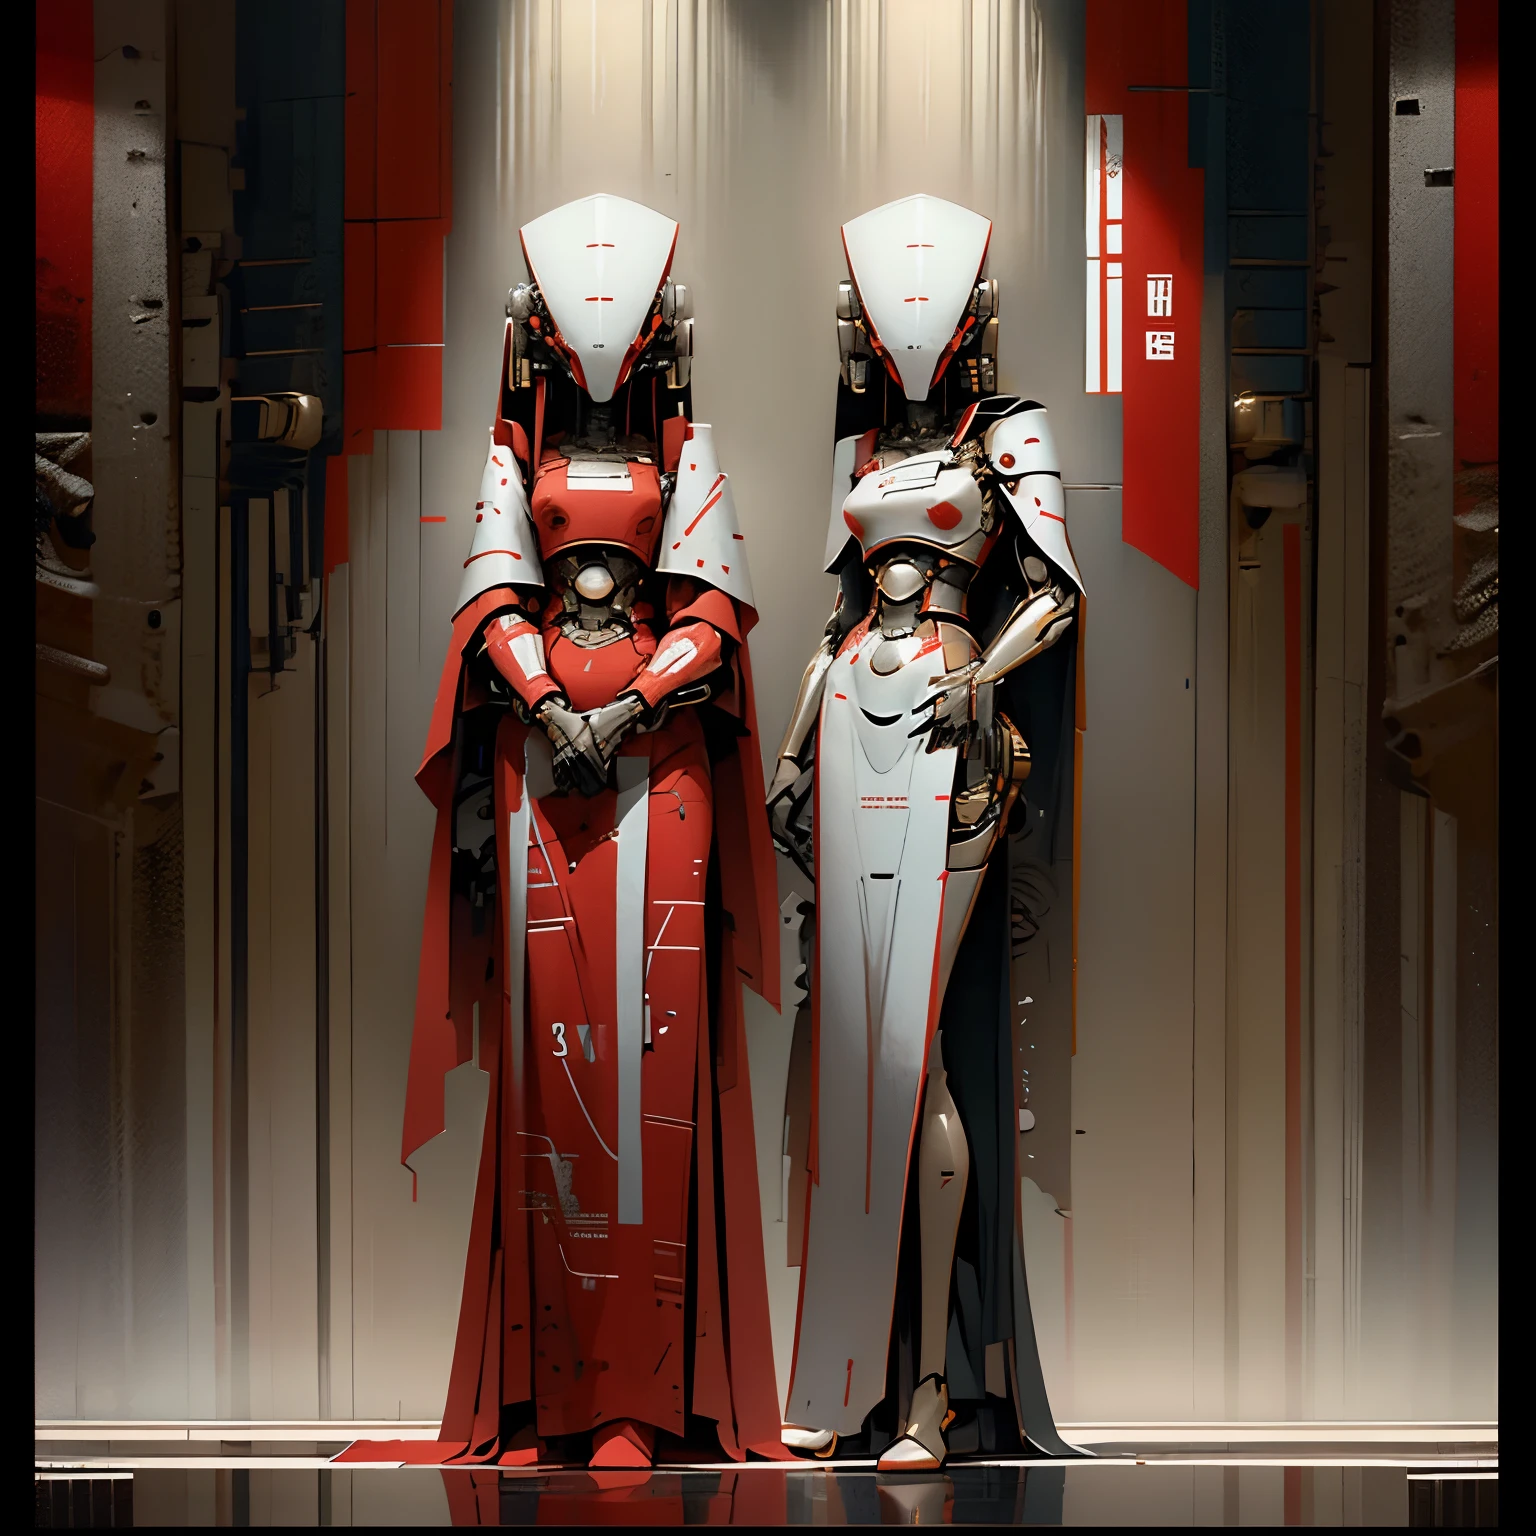 Robot conjoined twins, connected at the chest, very elegant robot, red and white robes, wearing a red dress, long limbs, smooth robotic paneling, very thin frame, flat chested, 